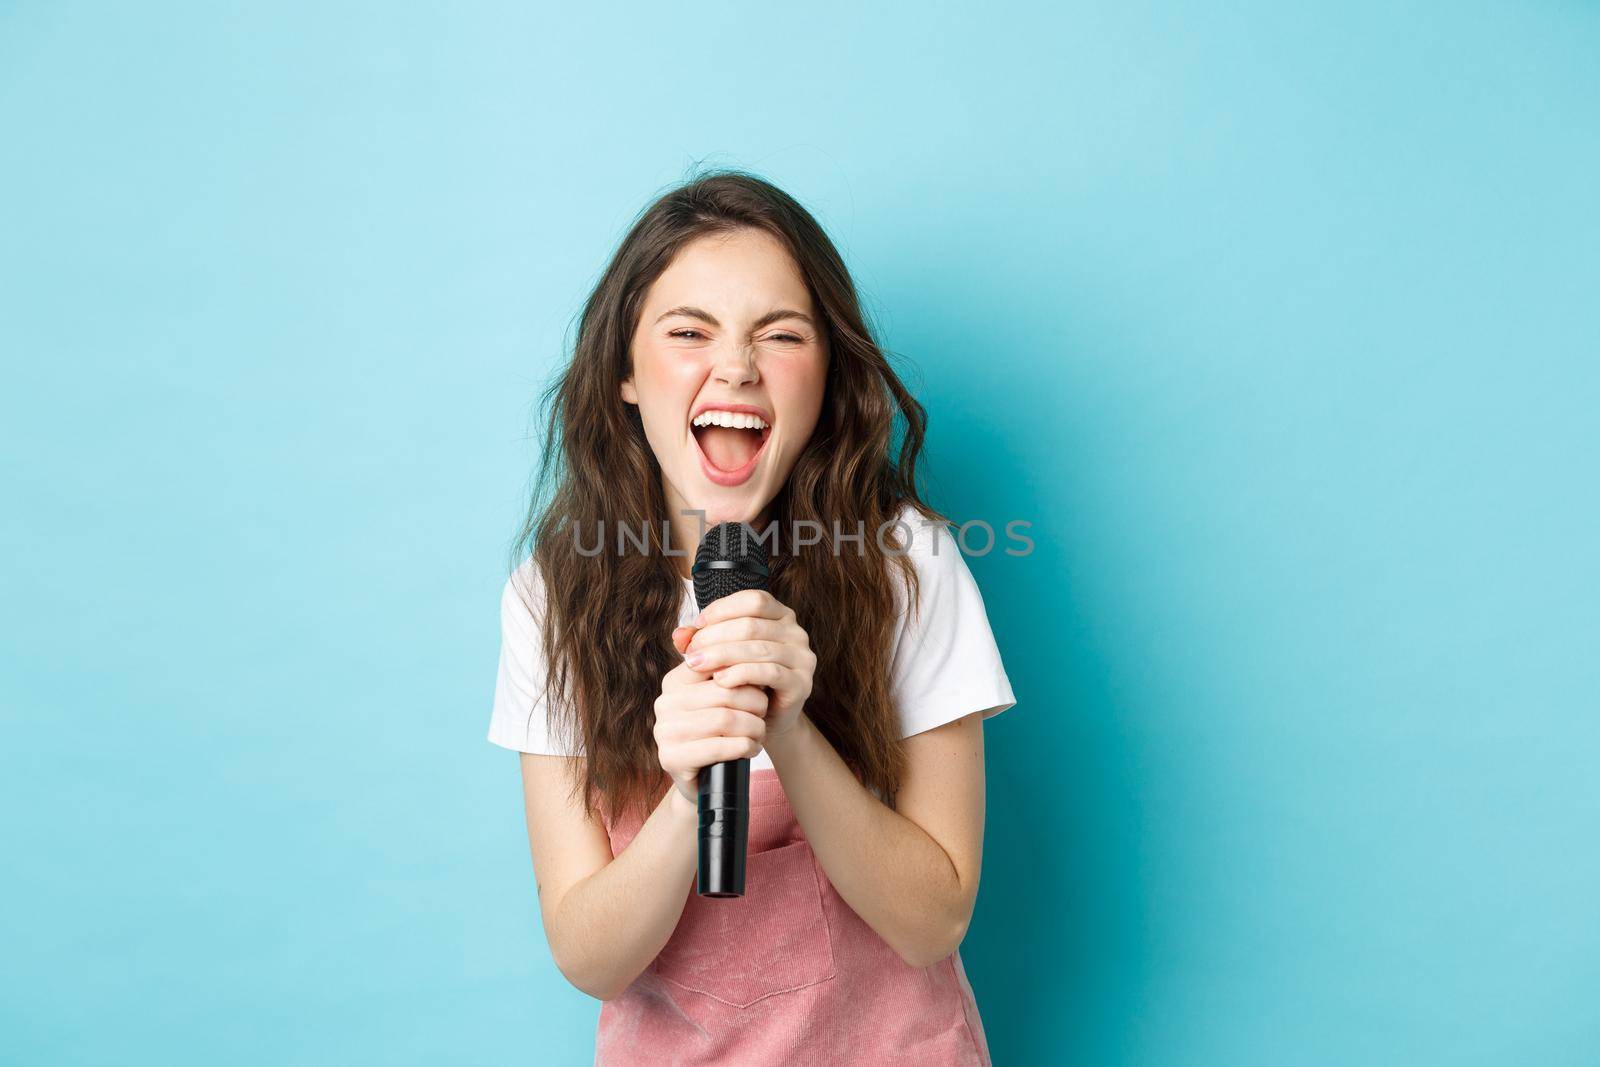 Excited pretty girl singing karaoke, holding microphone and smiling happy, standing over blue background.